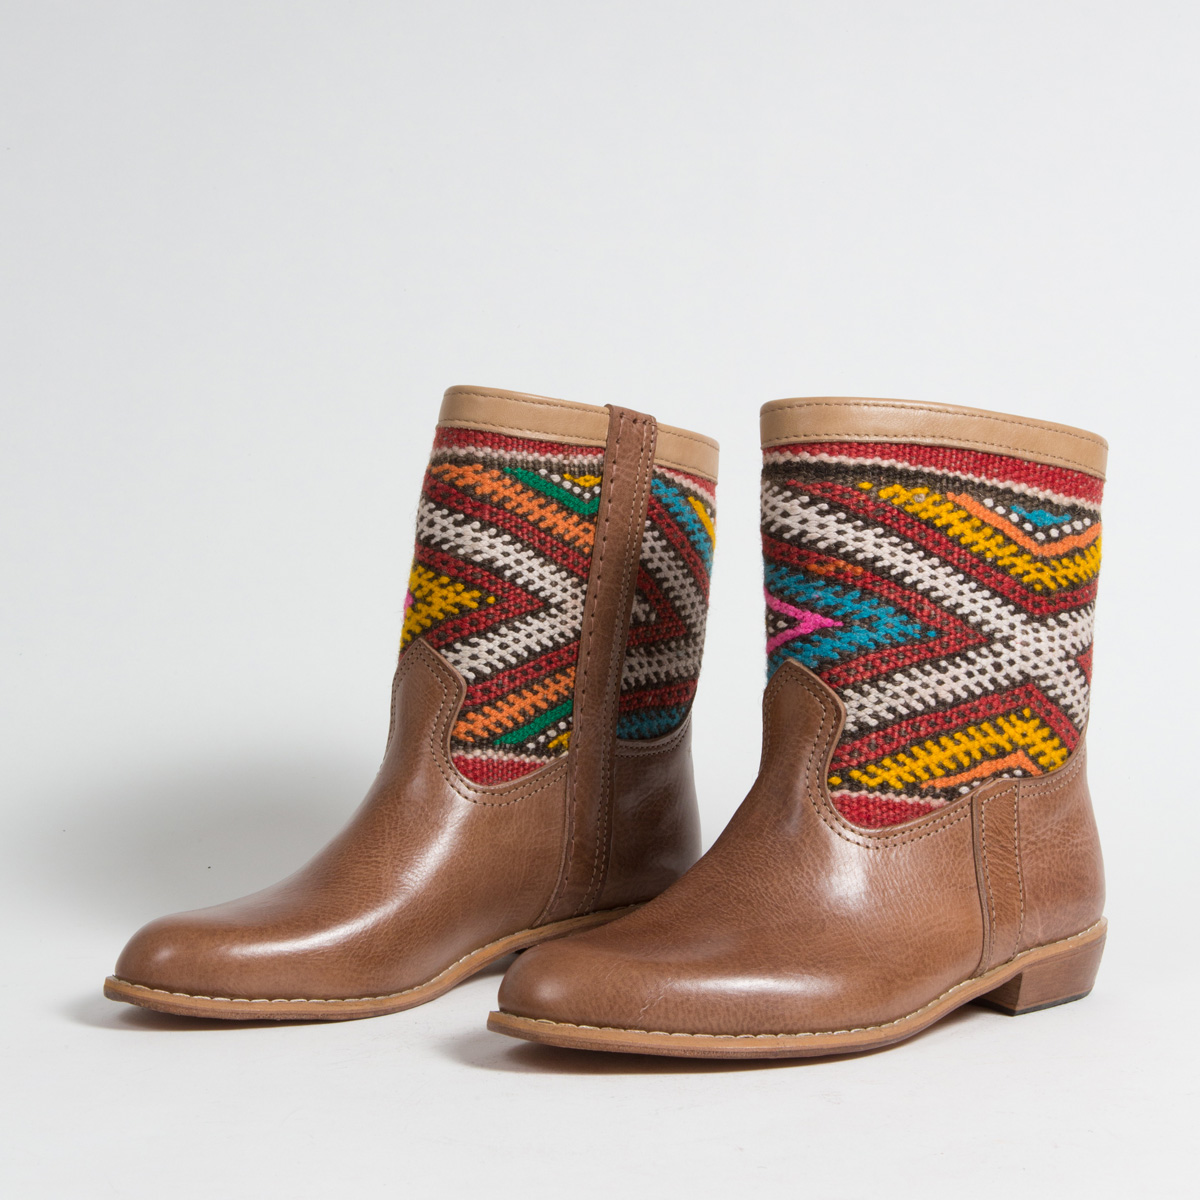 Bottines Kilim cuir mababouche artisanales (Réf. MCH5-40)